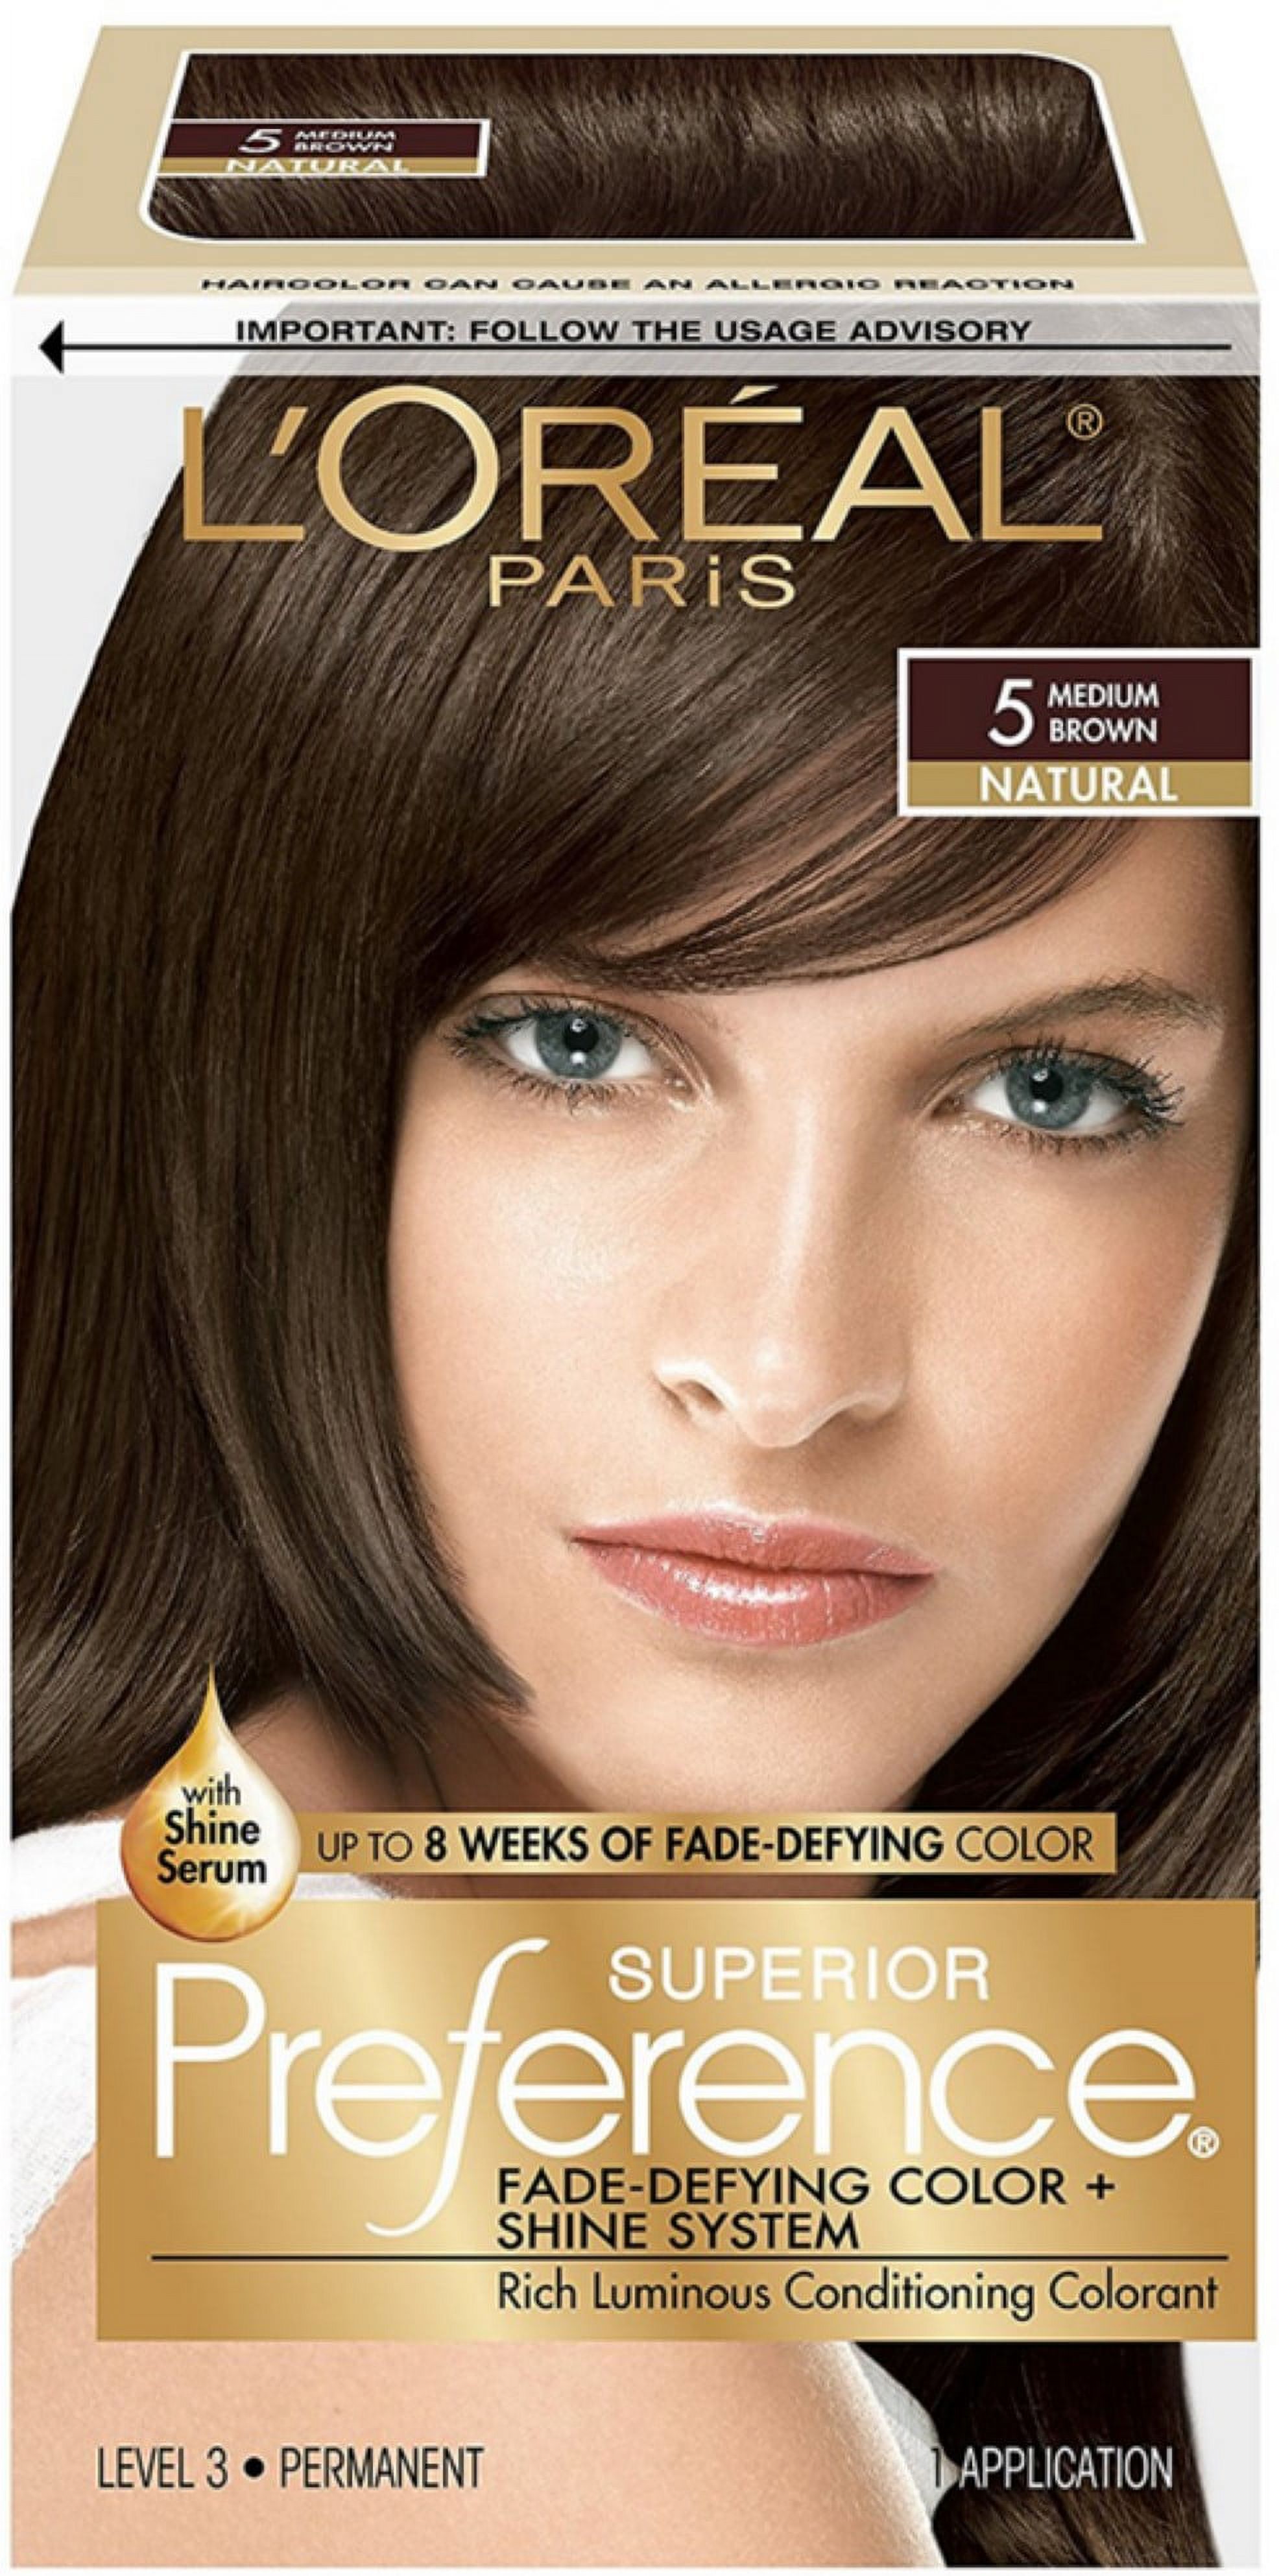 L'Oreal Paris Superior Preference Permanent Hair Color, 5 Medium Brown, 1 Each - image 1 of 7